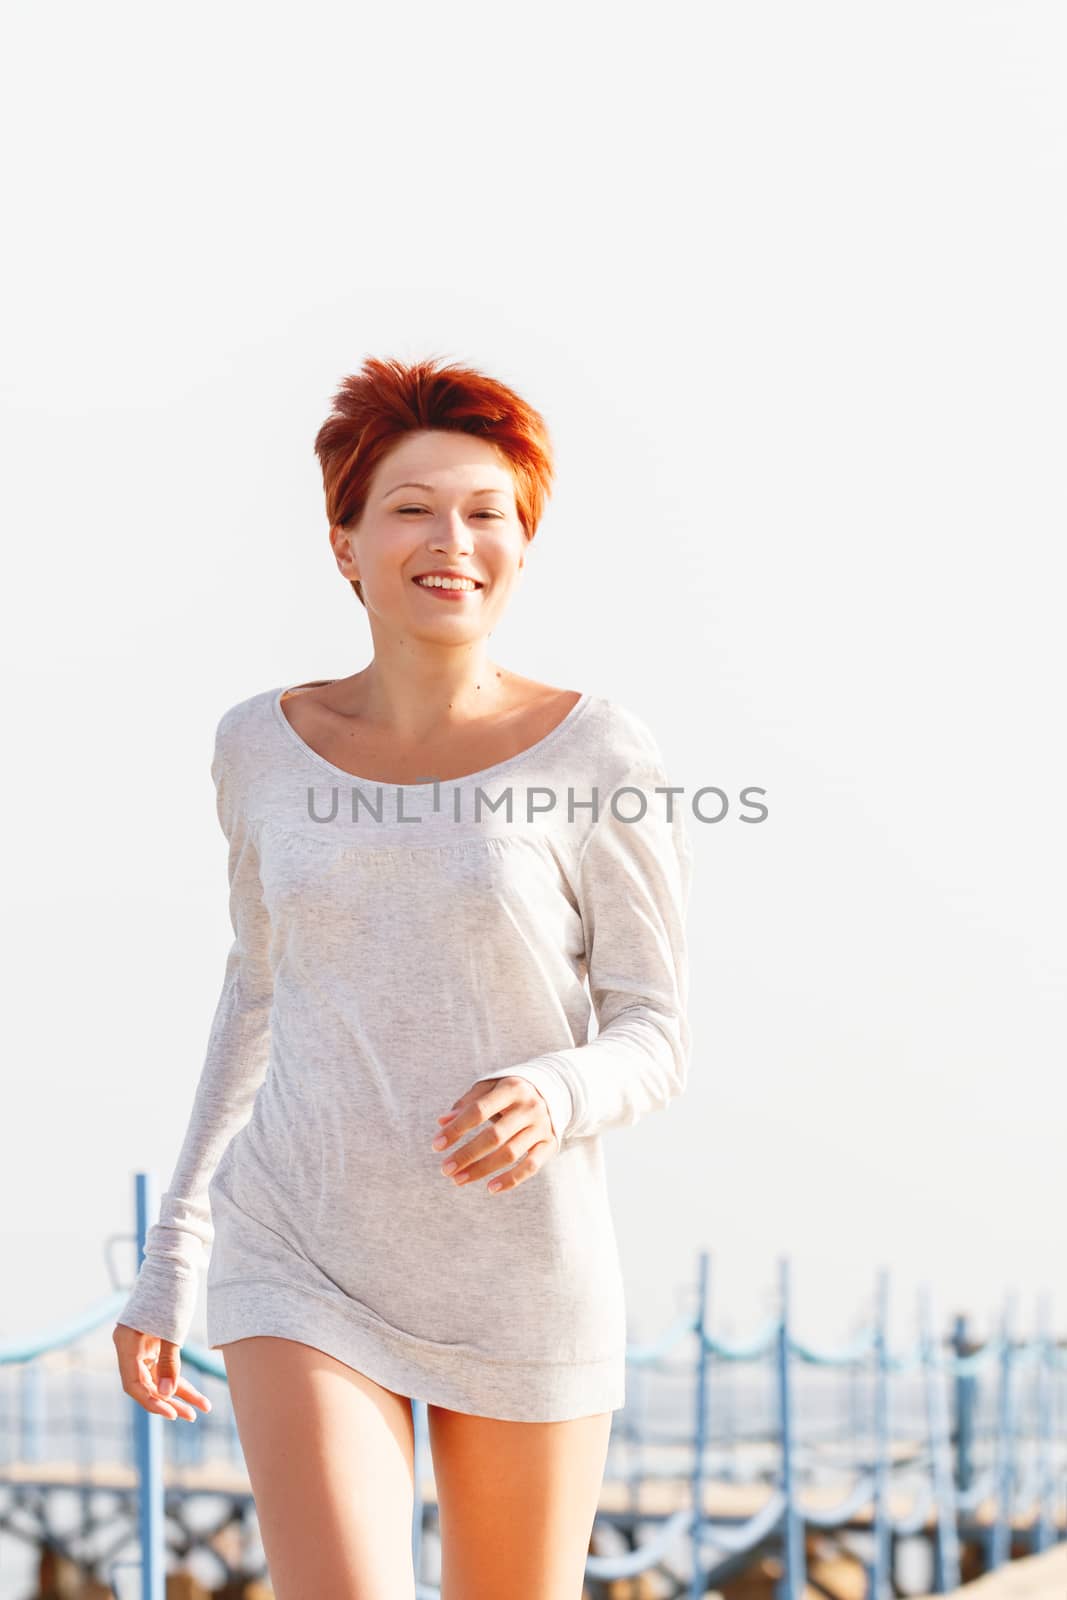 Wide smiling young woman with red short hair cut running on wood by aksenovko